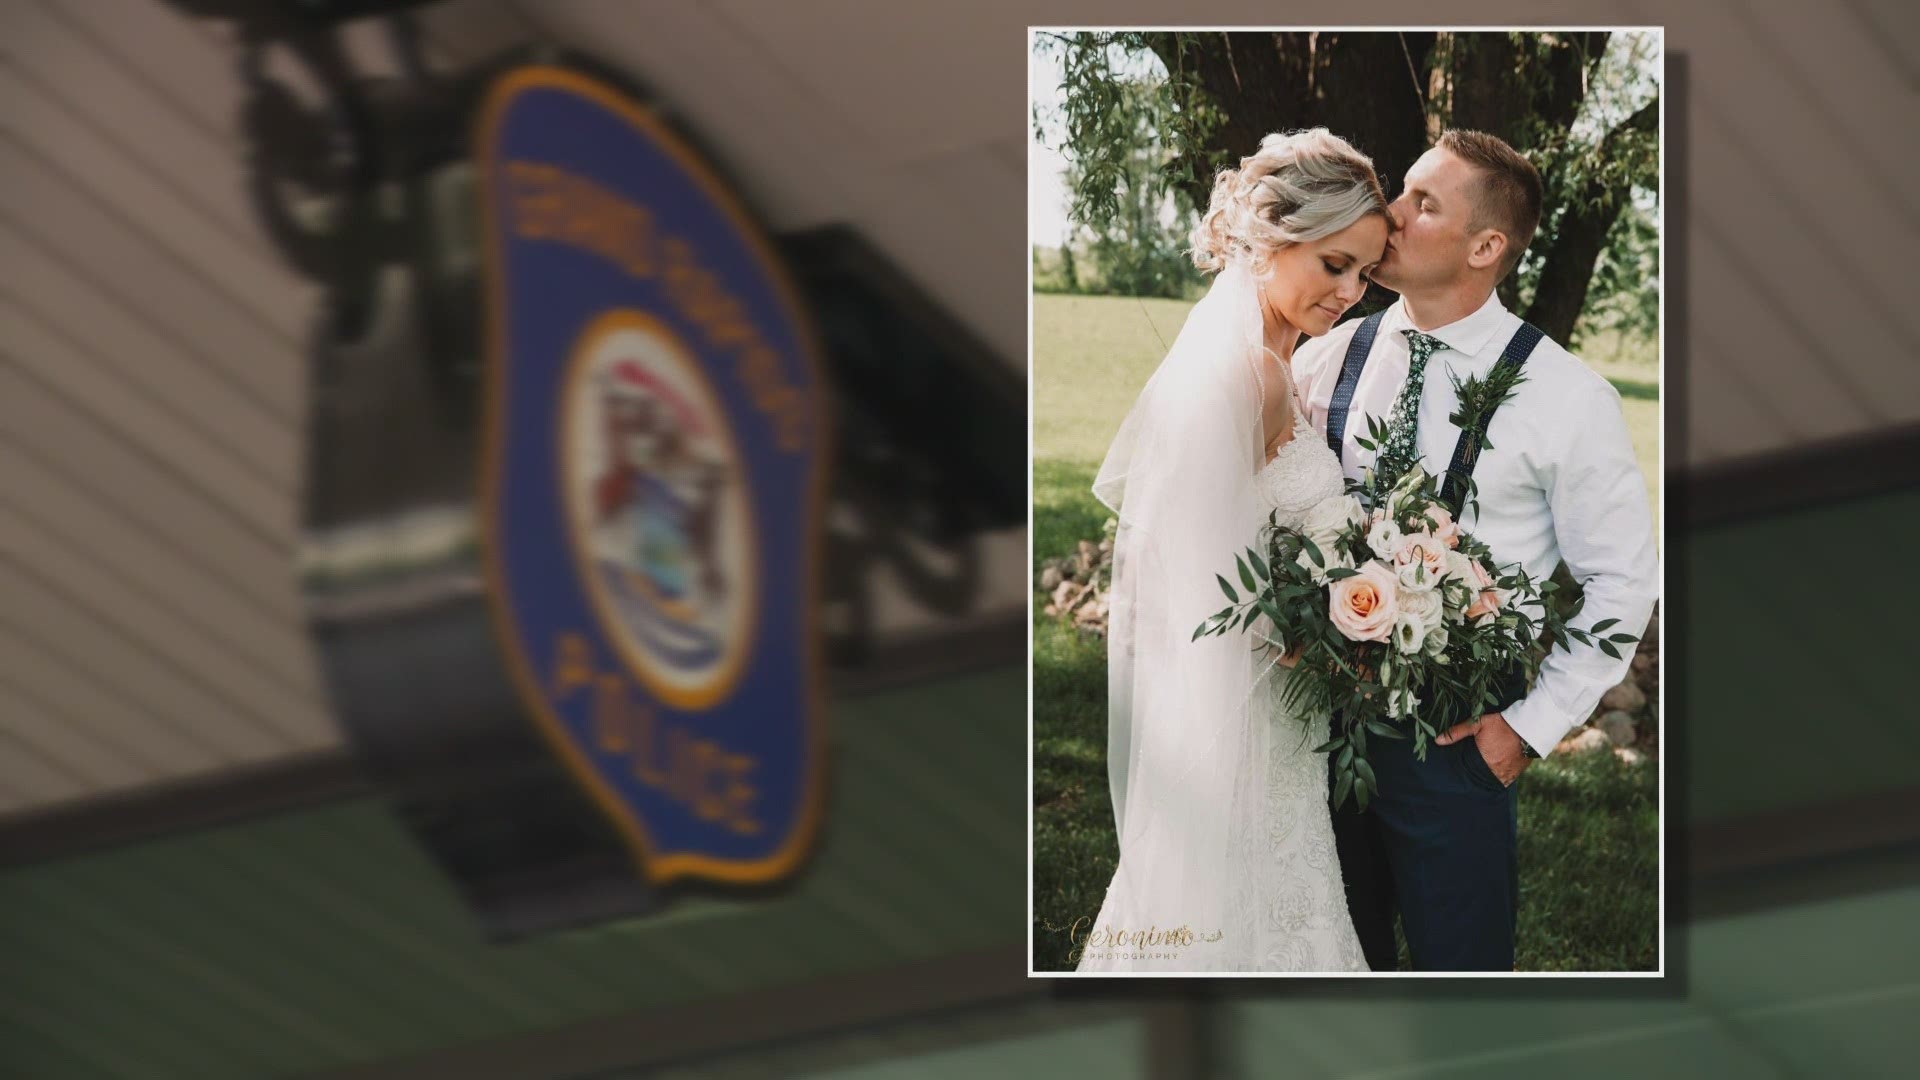 On May 30, 2020, Grand Rapids Police officers Kelly Momber and Cole Hoyer got married. They didn't know that their happy day would turn into a night of chaos.